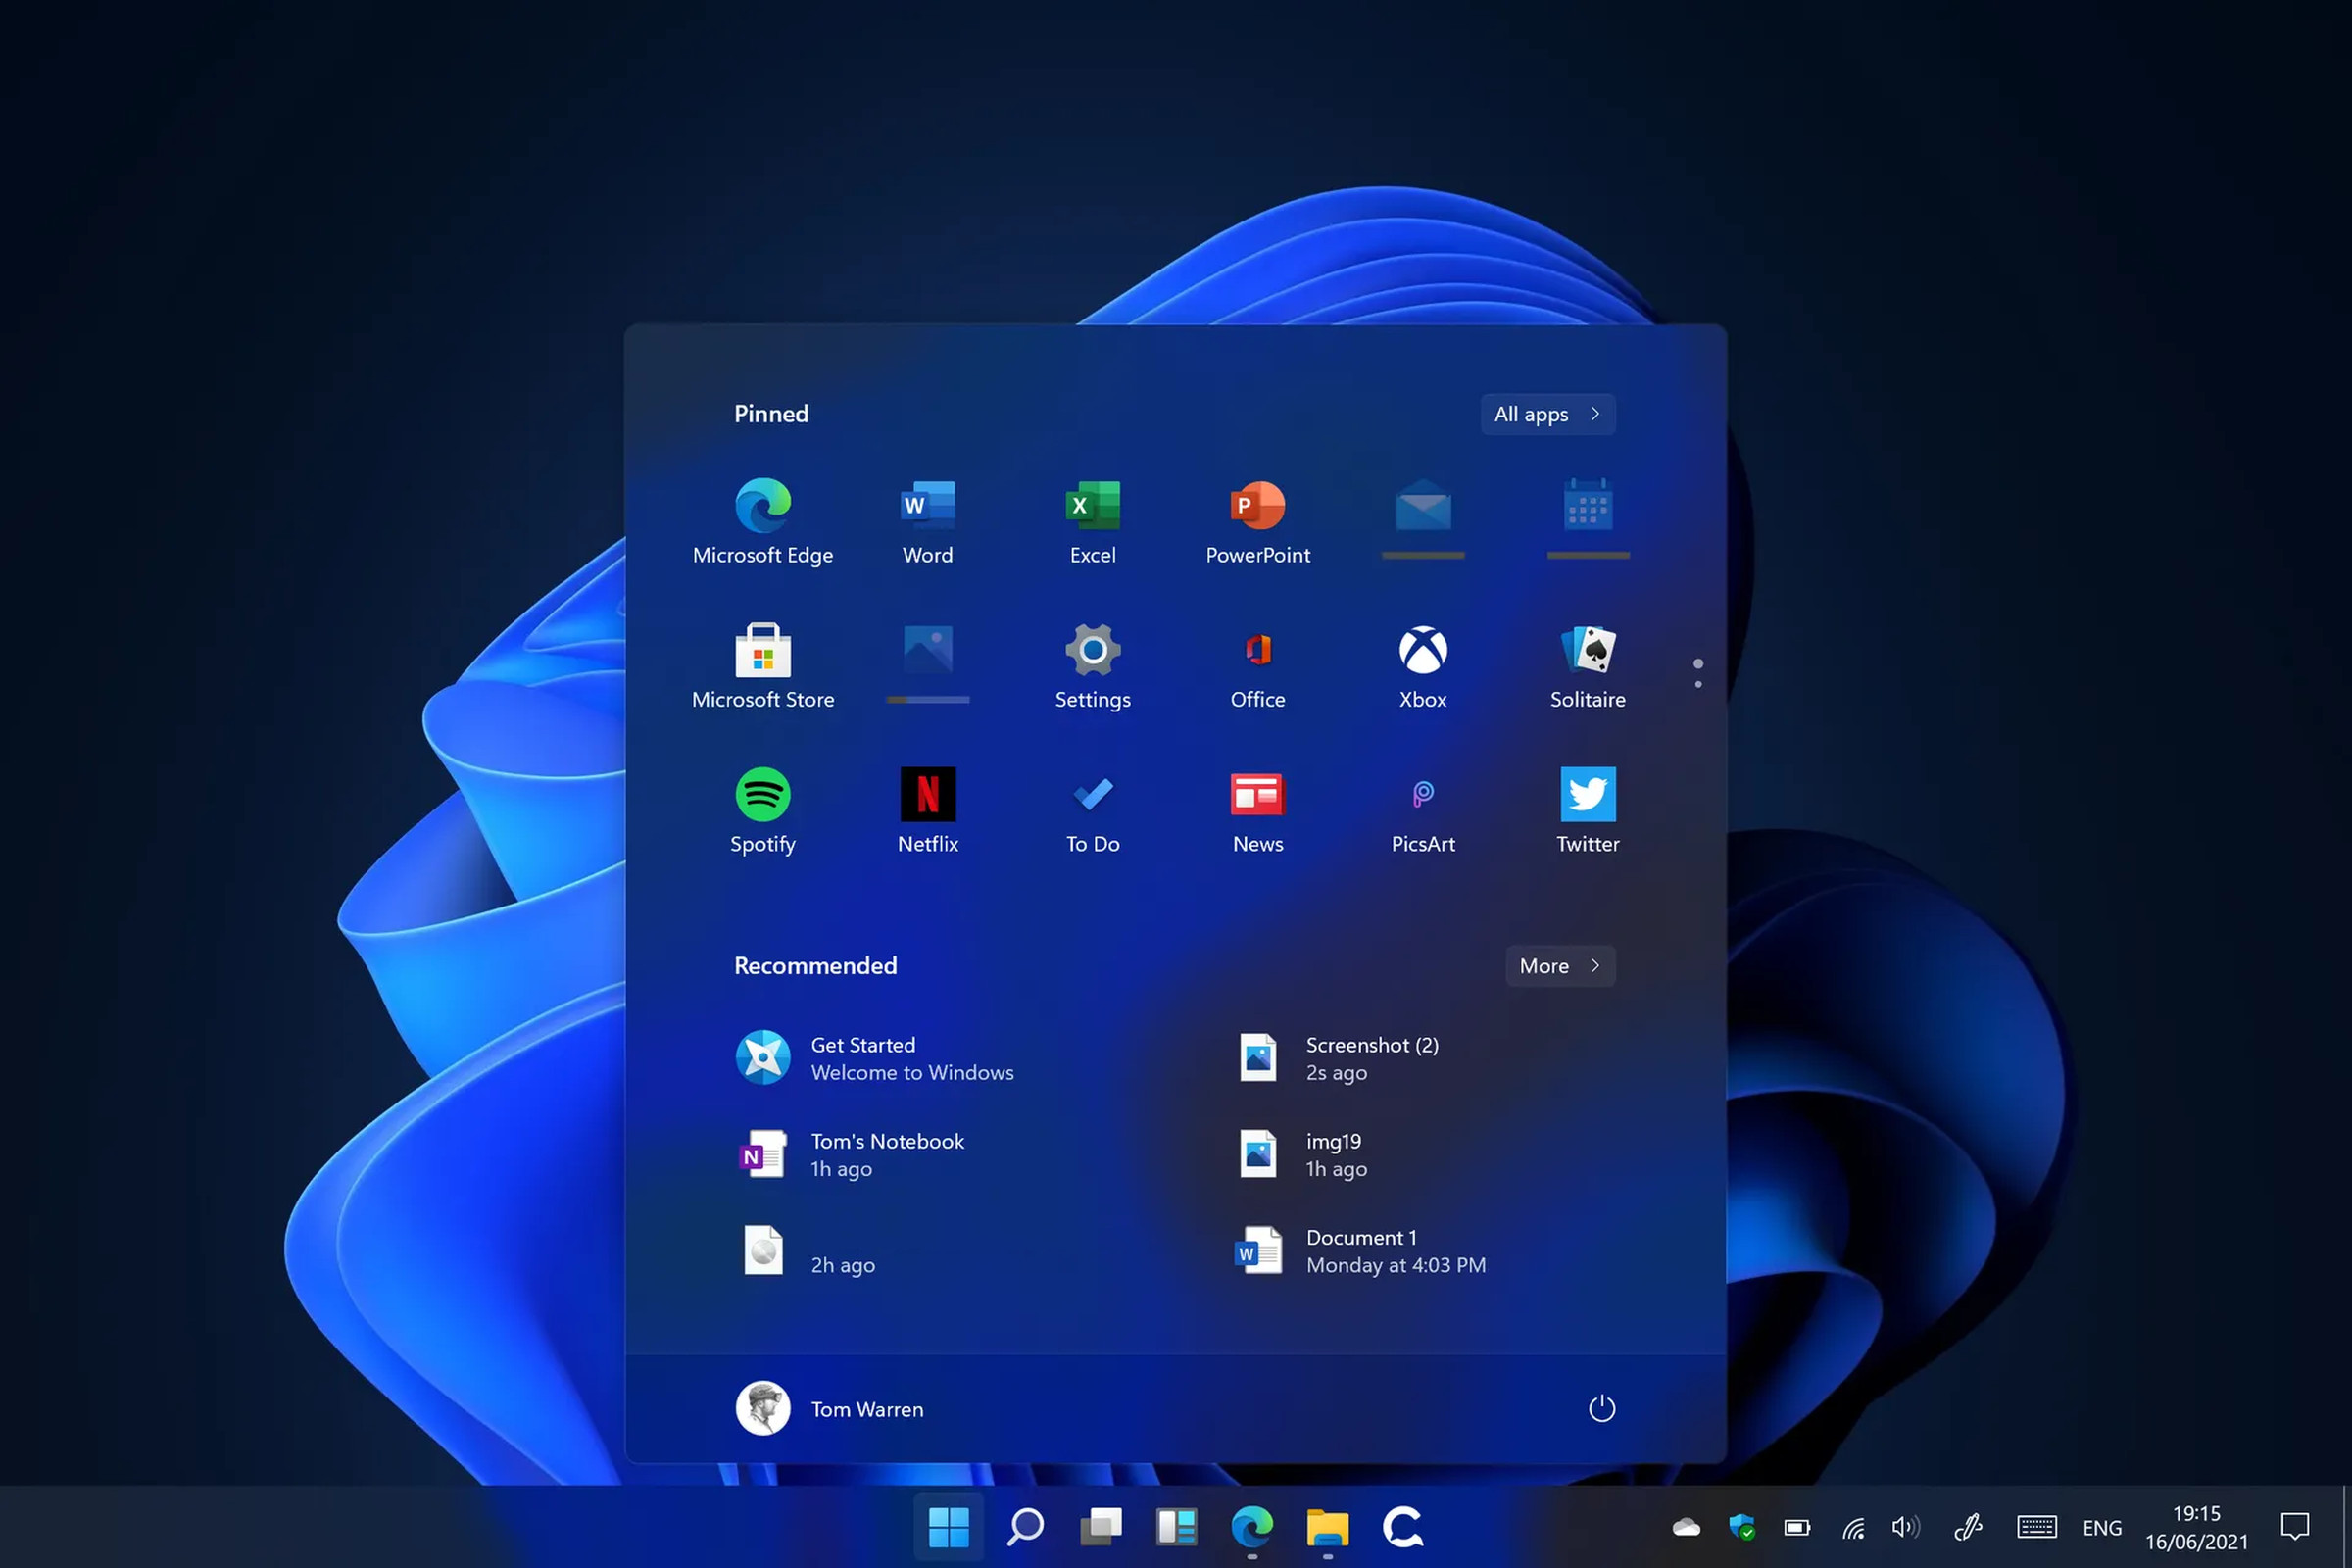 Part of the new Windows 11 UI.